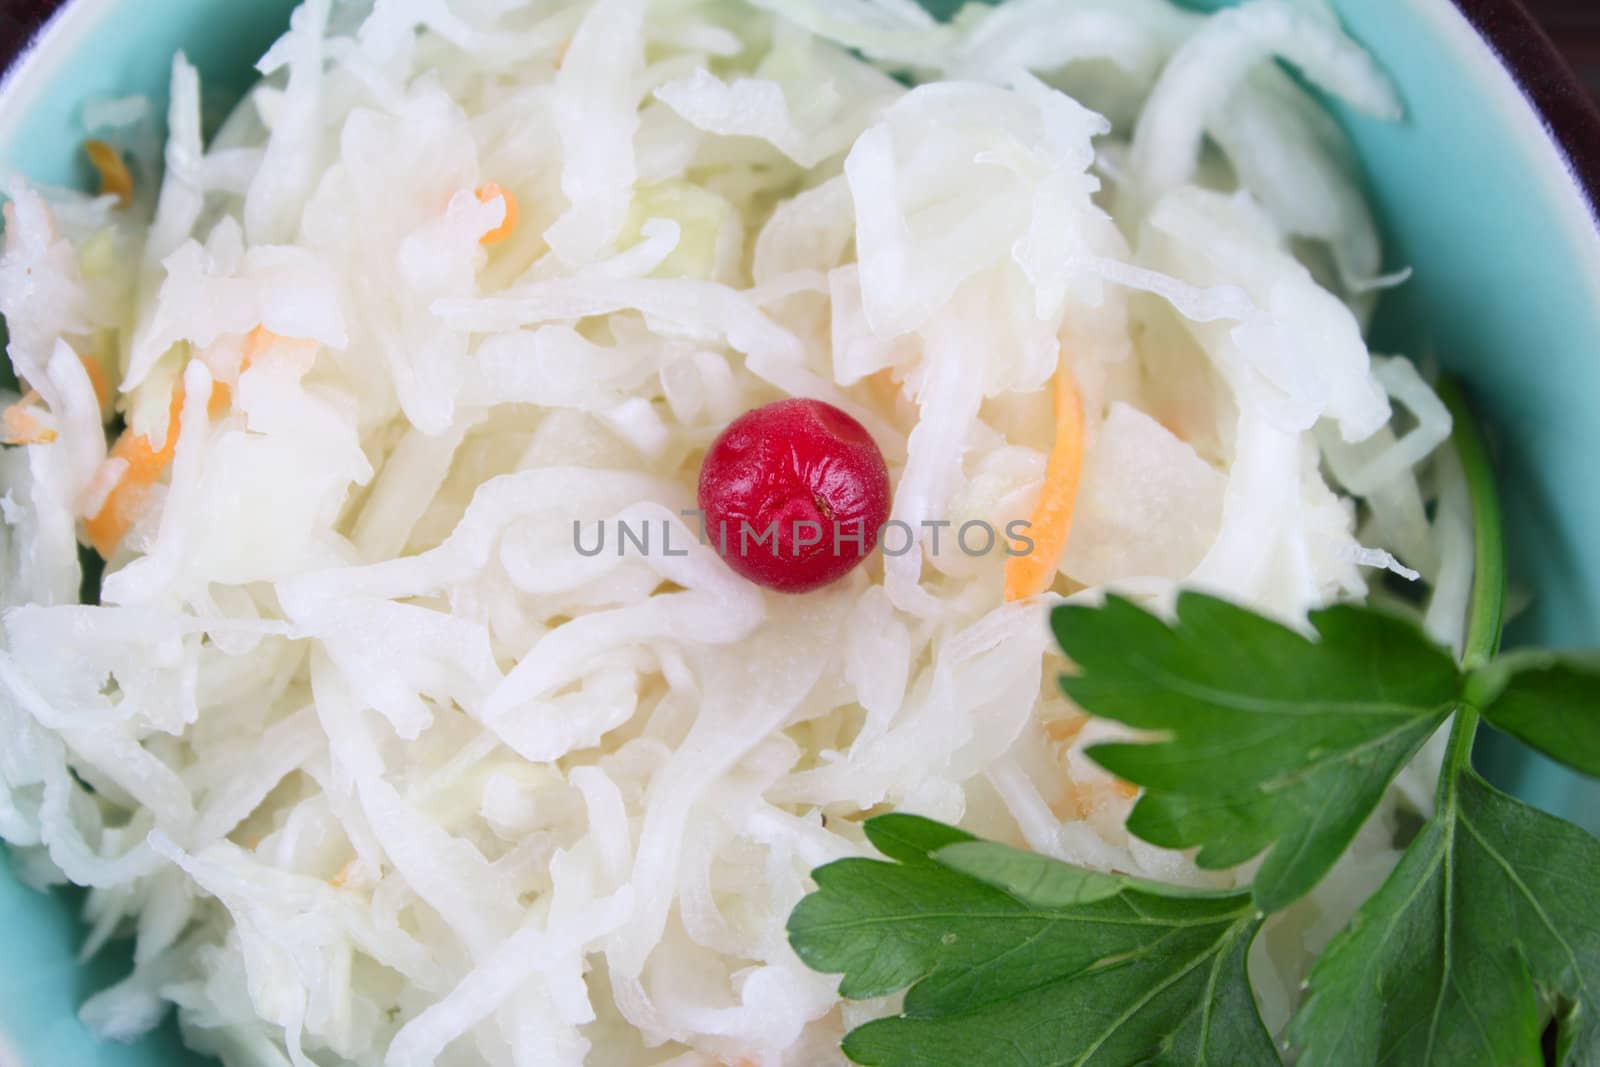 Cabbage salad with a cowberry removed close up